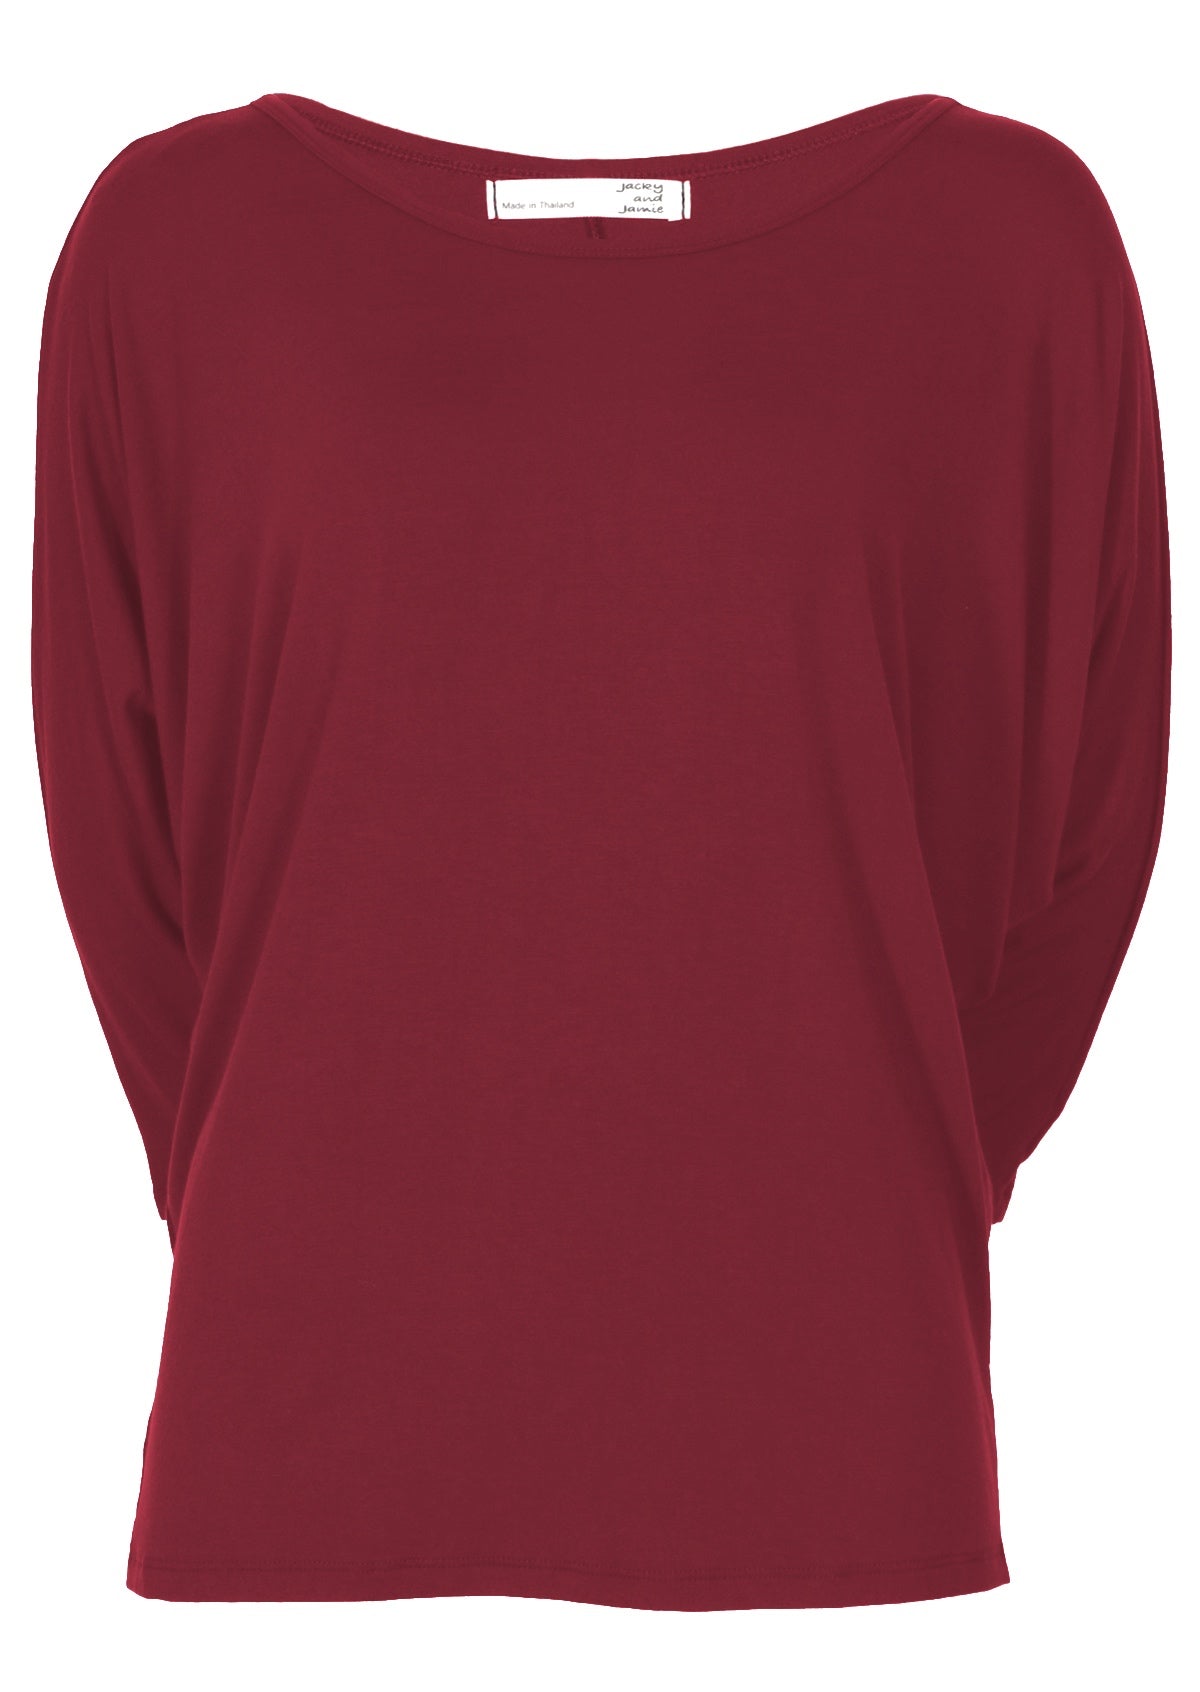 Front view of a women's 3/4 sleeve rayon batwing round neckline maroon top.